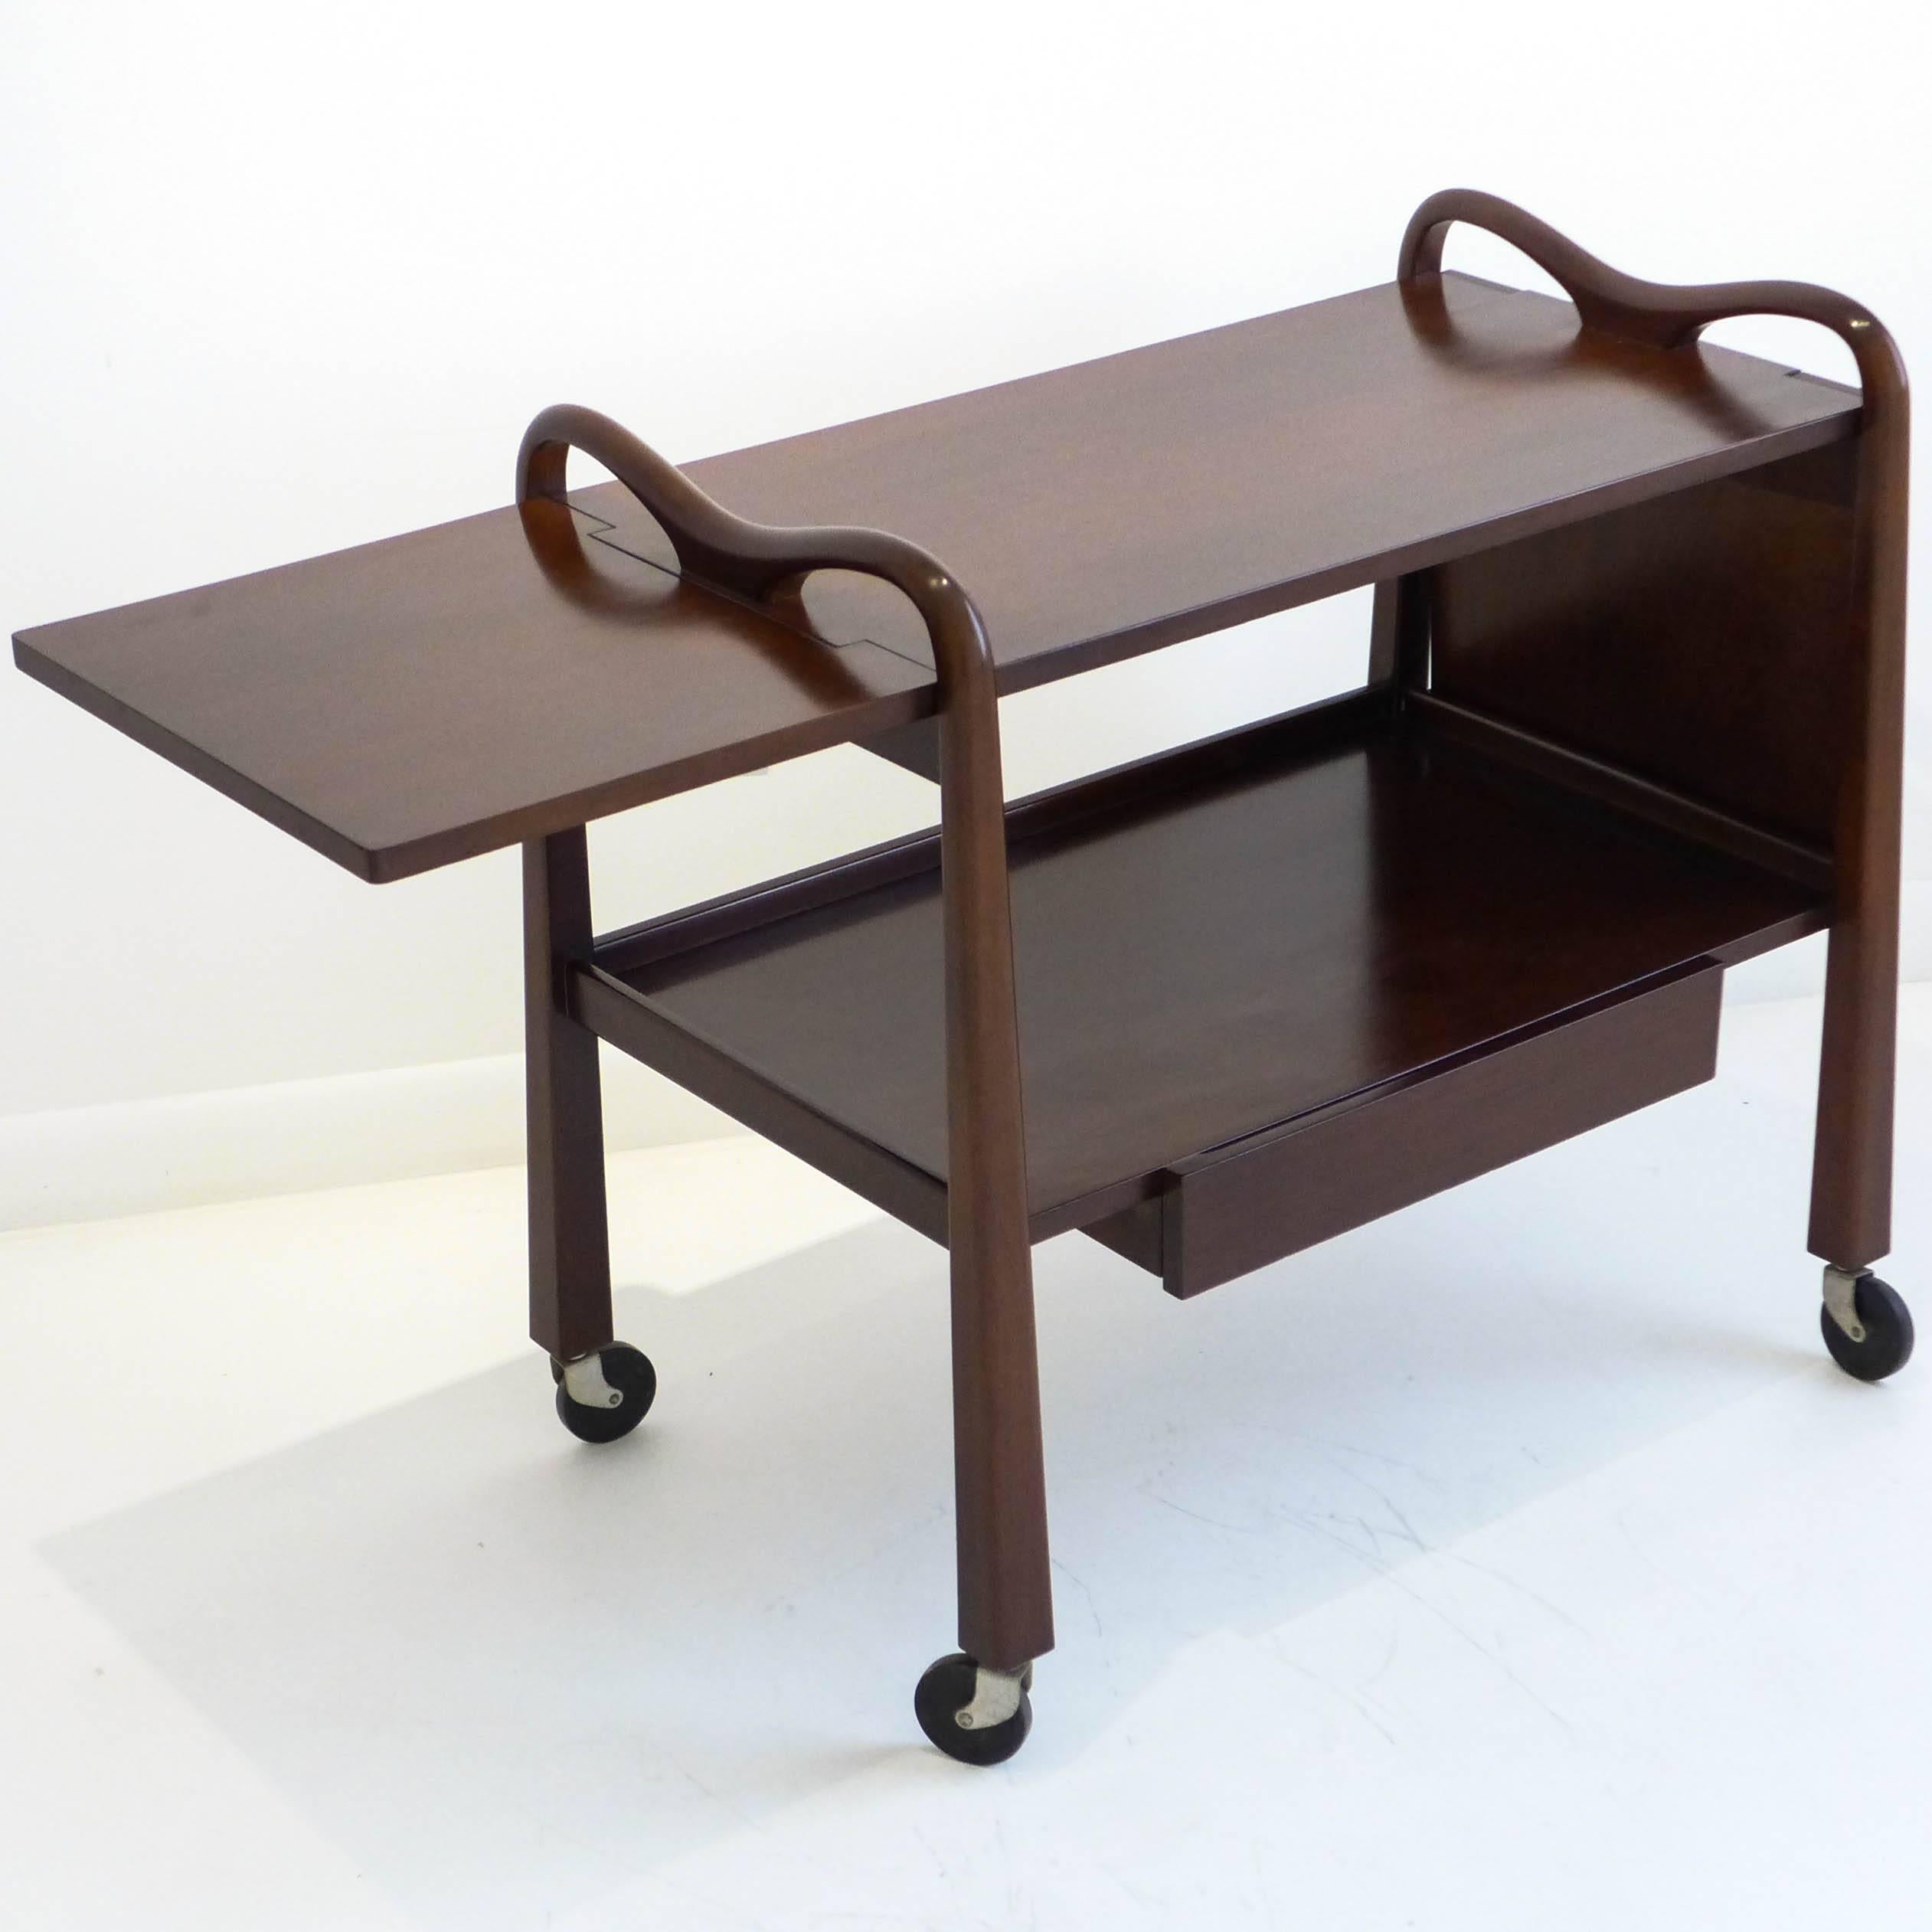 Rare rolling bar or serving cart of Cuban mahogany with integrated handles, flaring legs, a medial drawer and sides panels that can be raised or lowered. An elegant design by American designer Edmond J. Spence, produced in Mexico by Industria